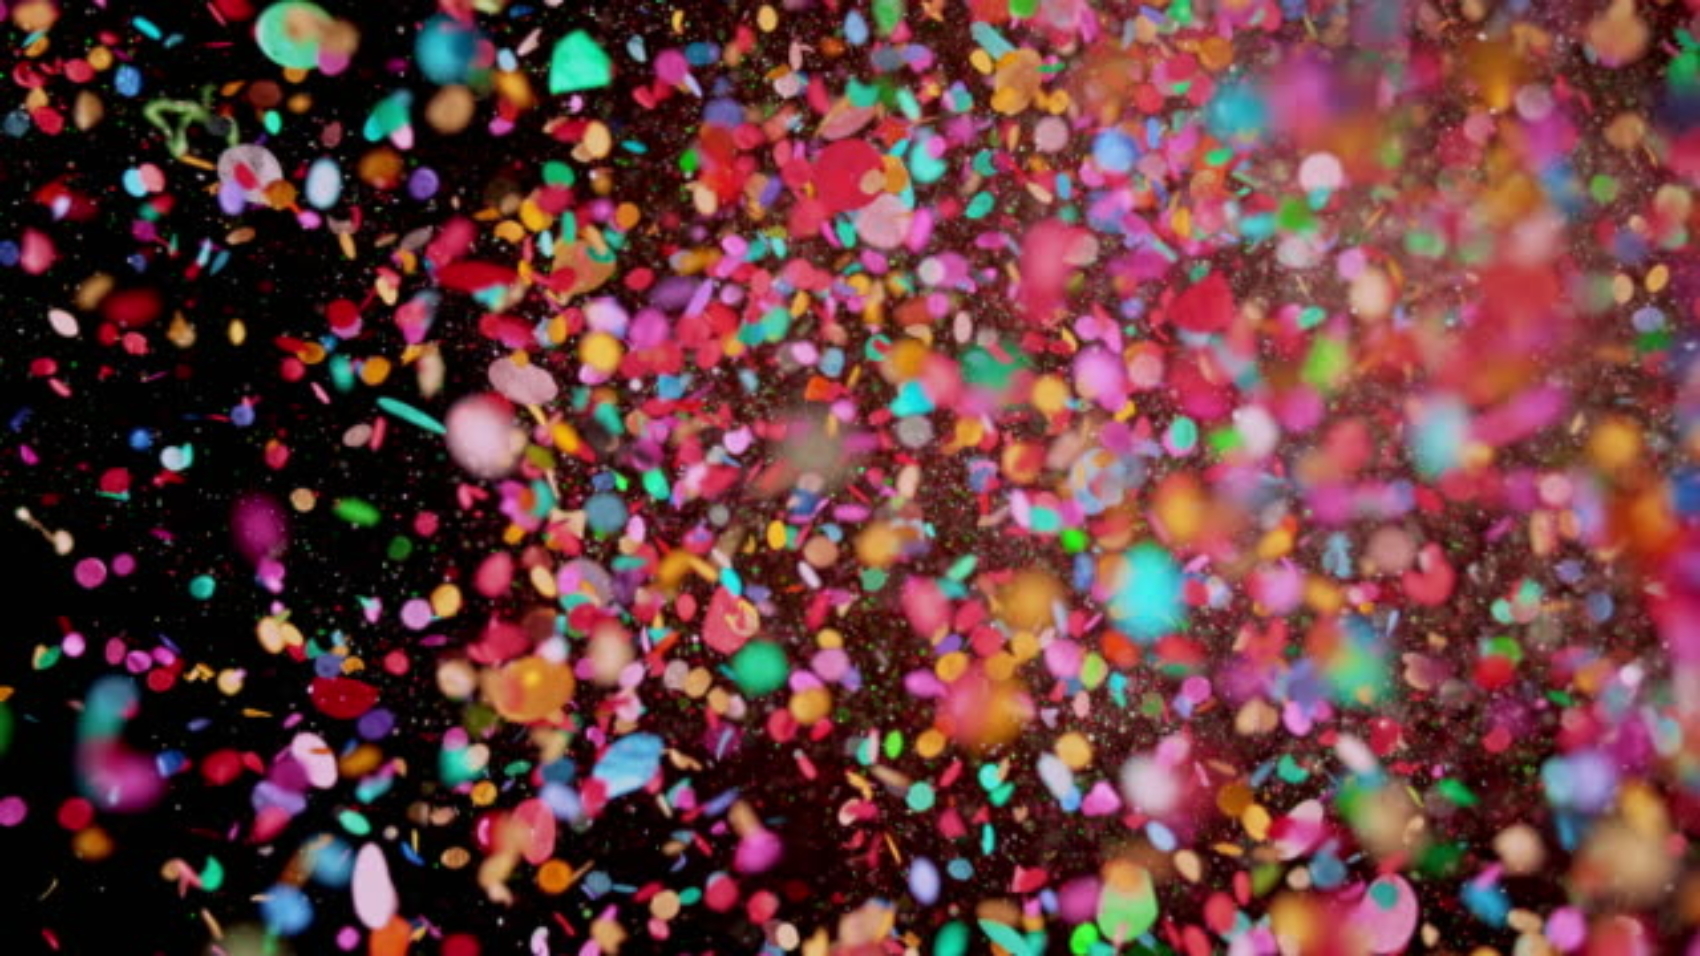 Slow motion close up locked down shot of colorful confetti flying towards the camera against black background. Shot in Slovenia.